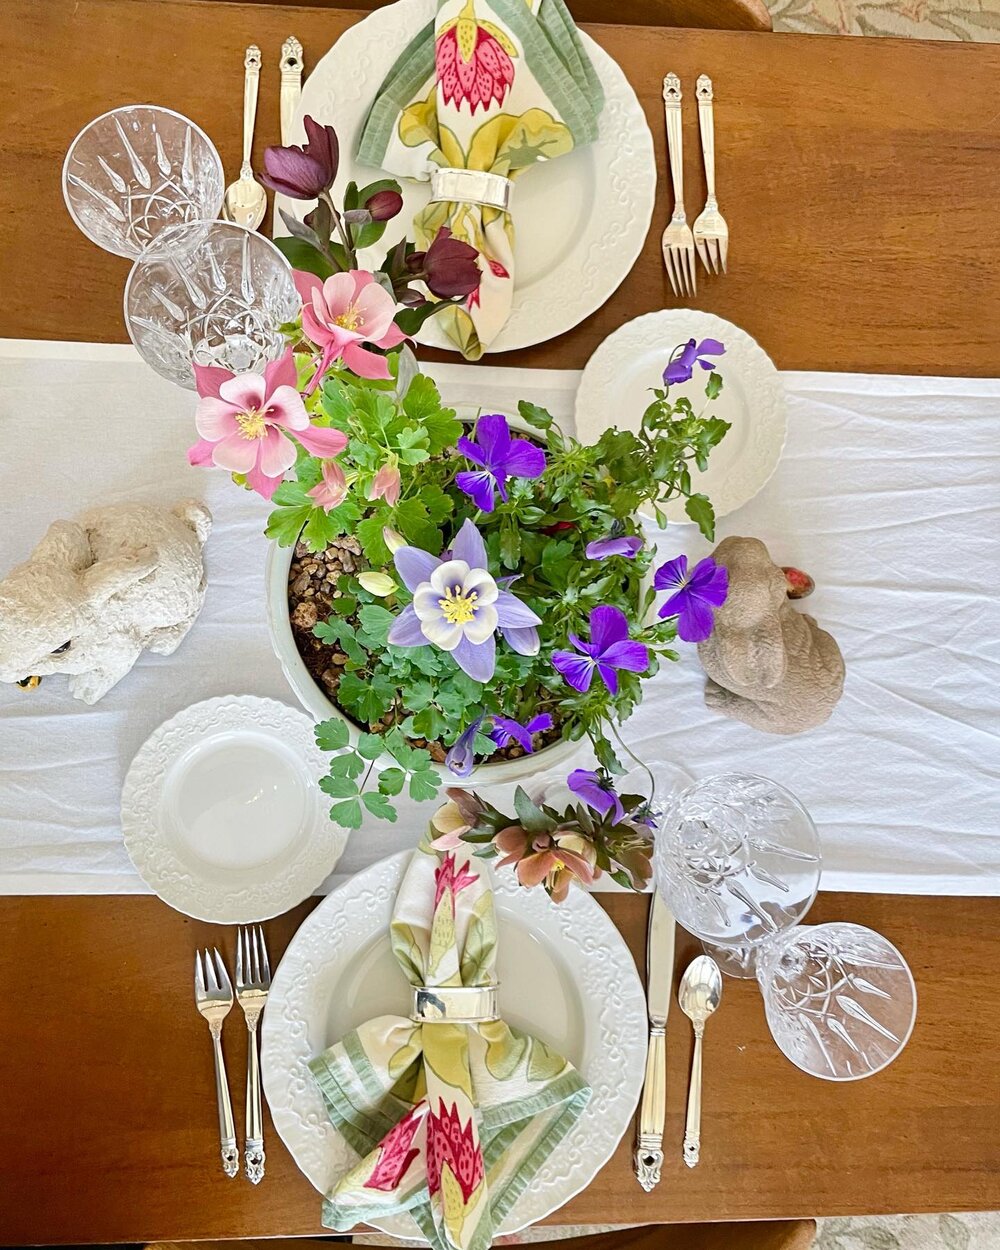 Save! If you are like me &mdash; not quite ready for Easter &mdash; here&rsquo;s a quick and festive table setting idea from last year. Pop over to your local garden center. I filled white pots with colorful blooms: two varieties of Aquilegia (aka Co